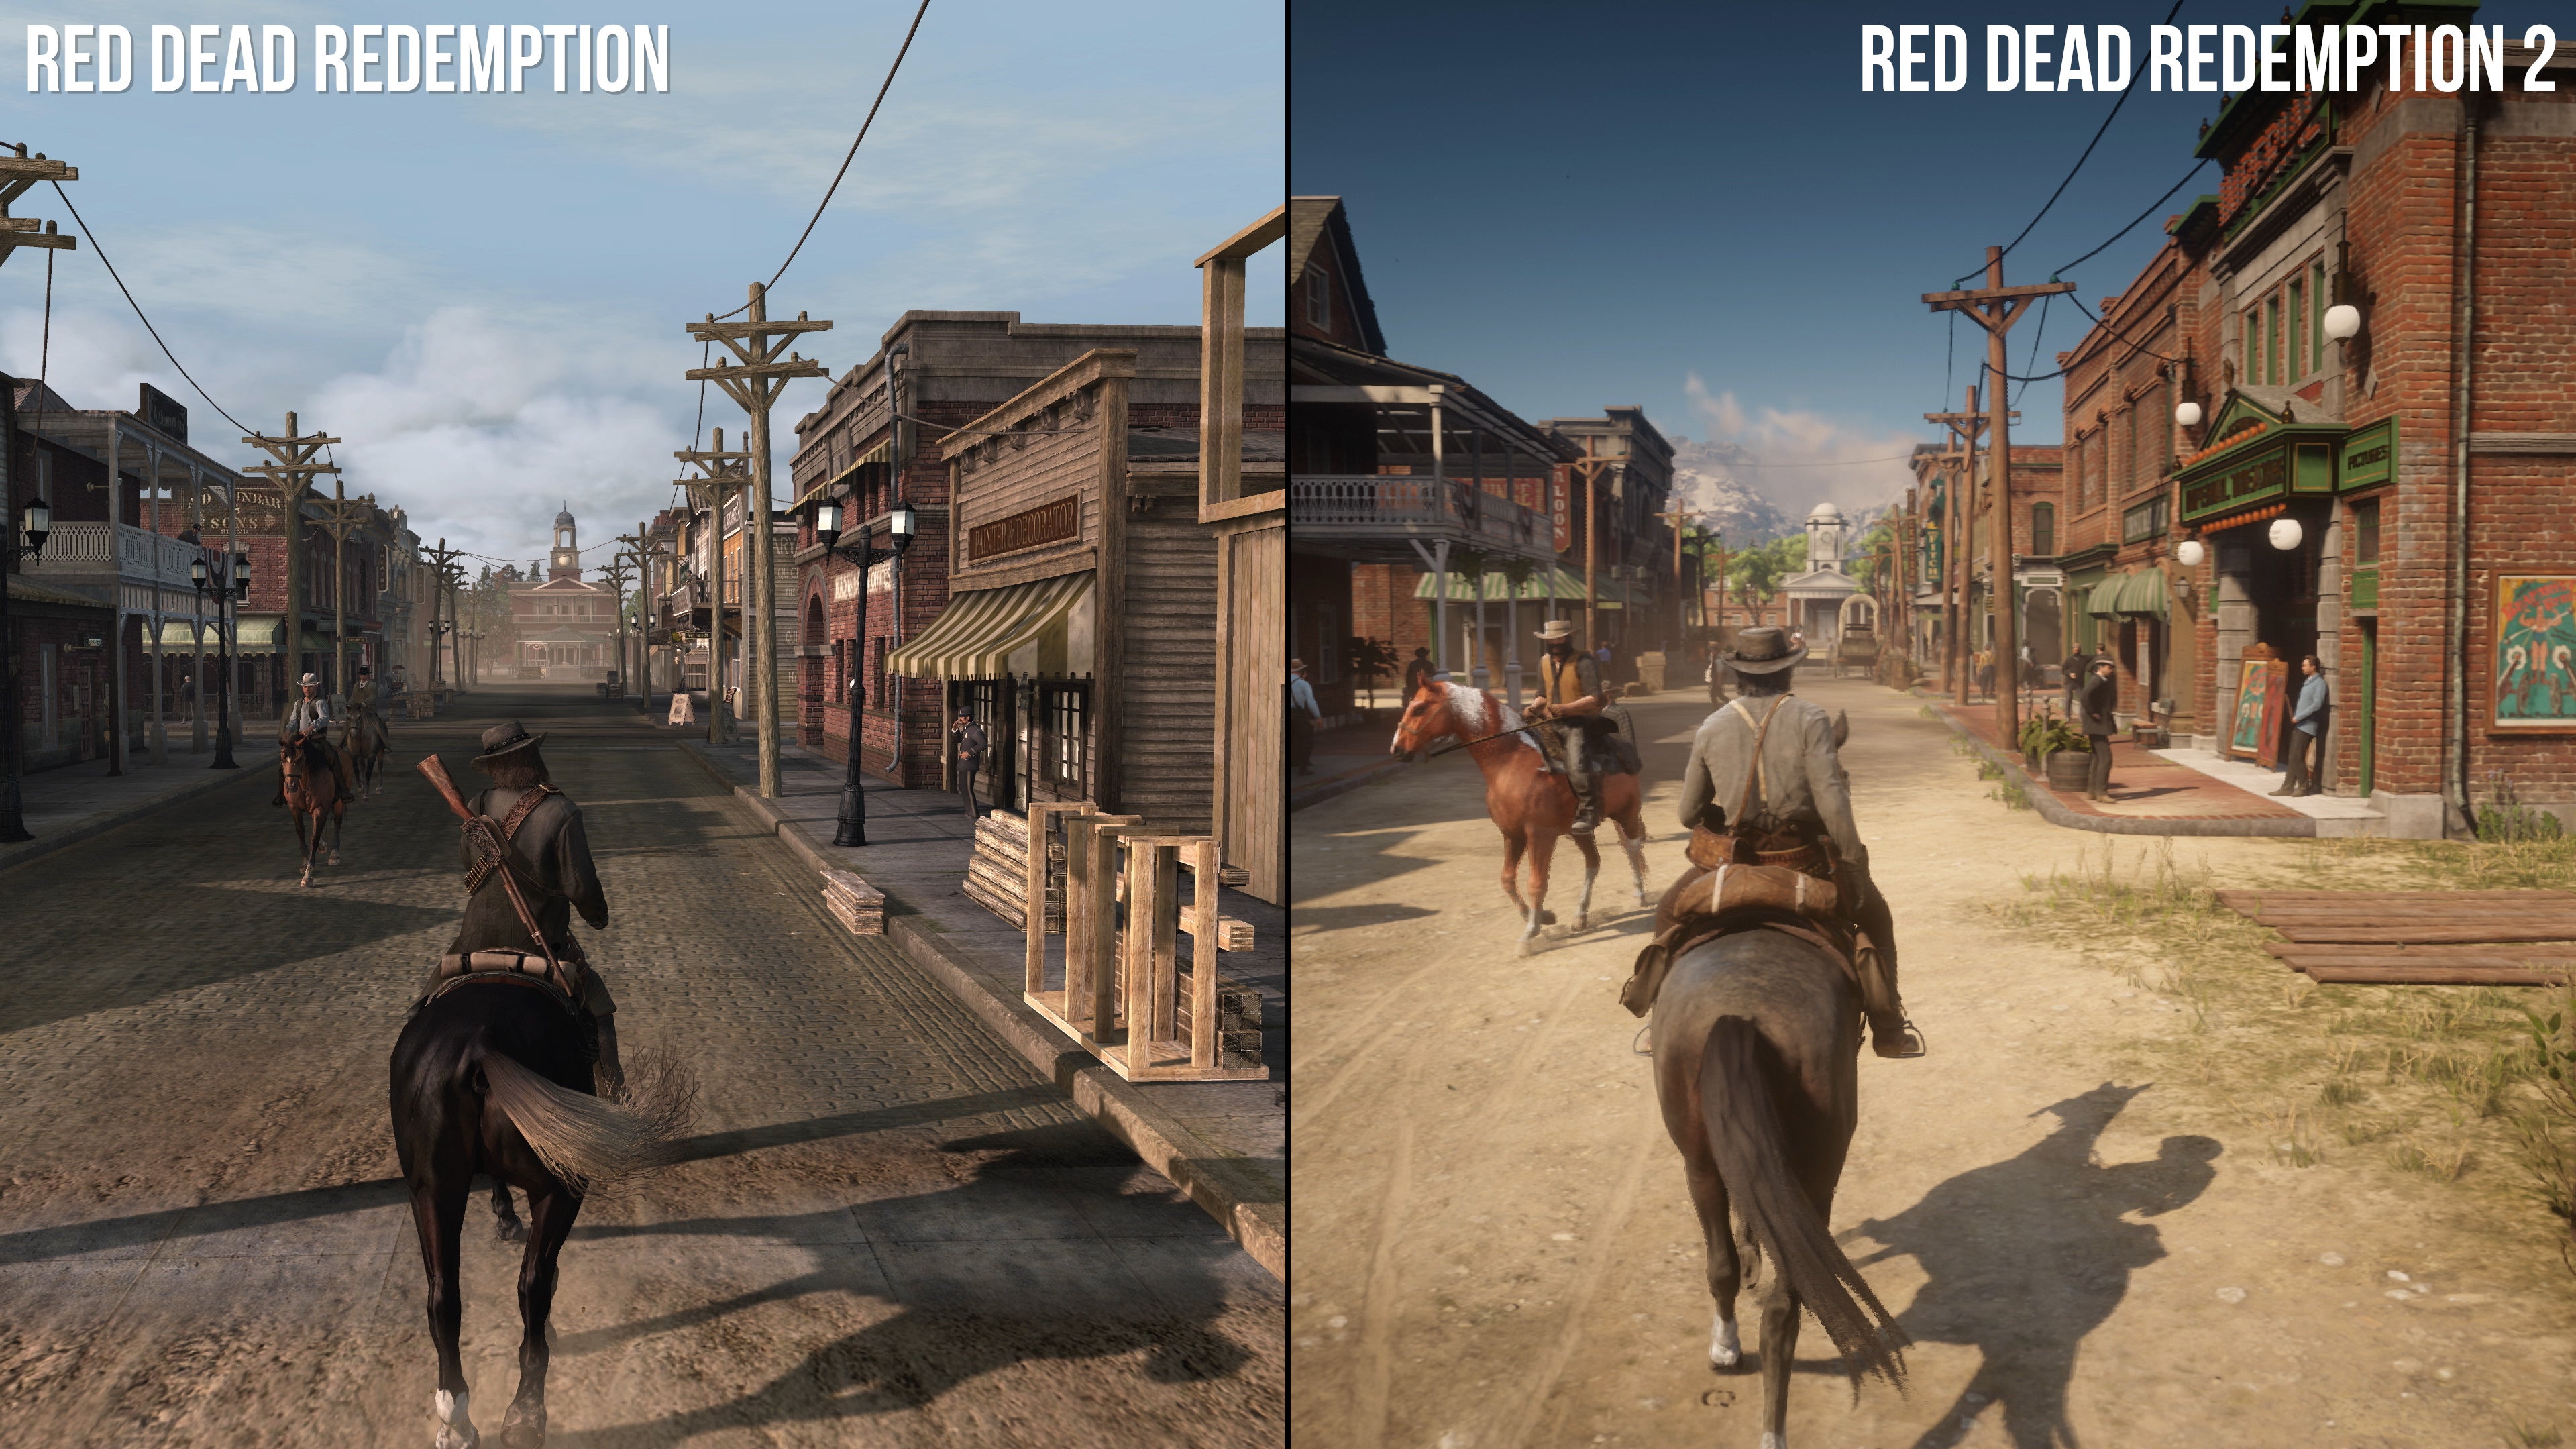 Red dead redemption на ps5. Red Dead Redemption 1. Red Dead Redemption 2 город Блэкуотер. Red Dead Redemption 1 vs Red Dead Redemption 2. Rdr 1 vs rdr 2.